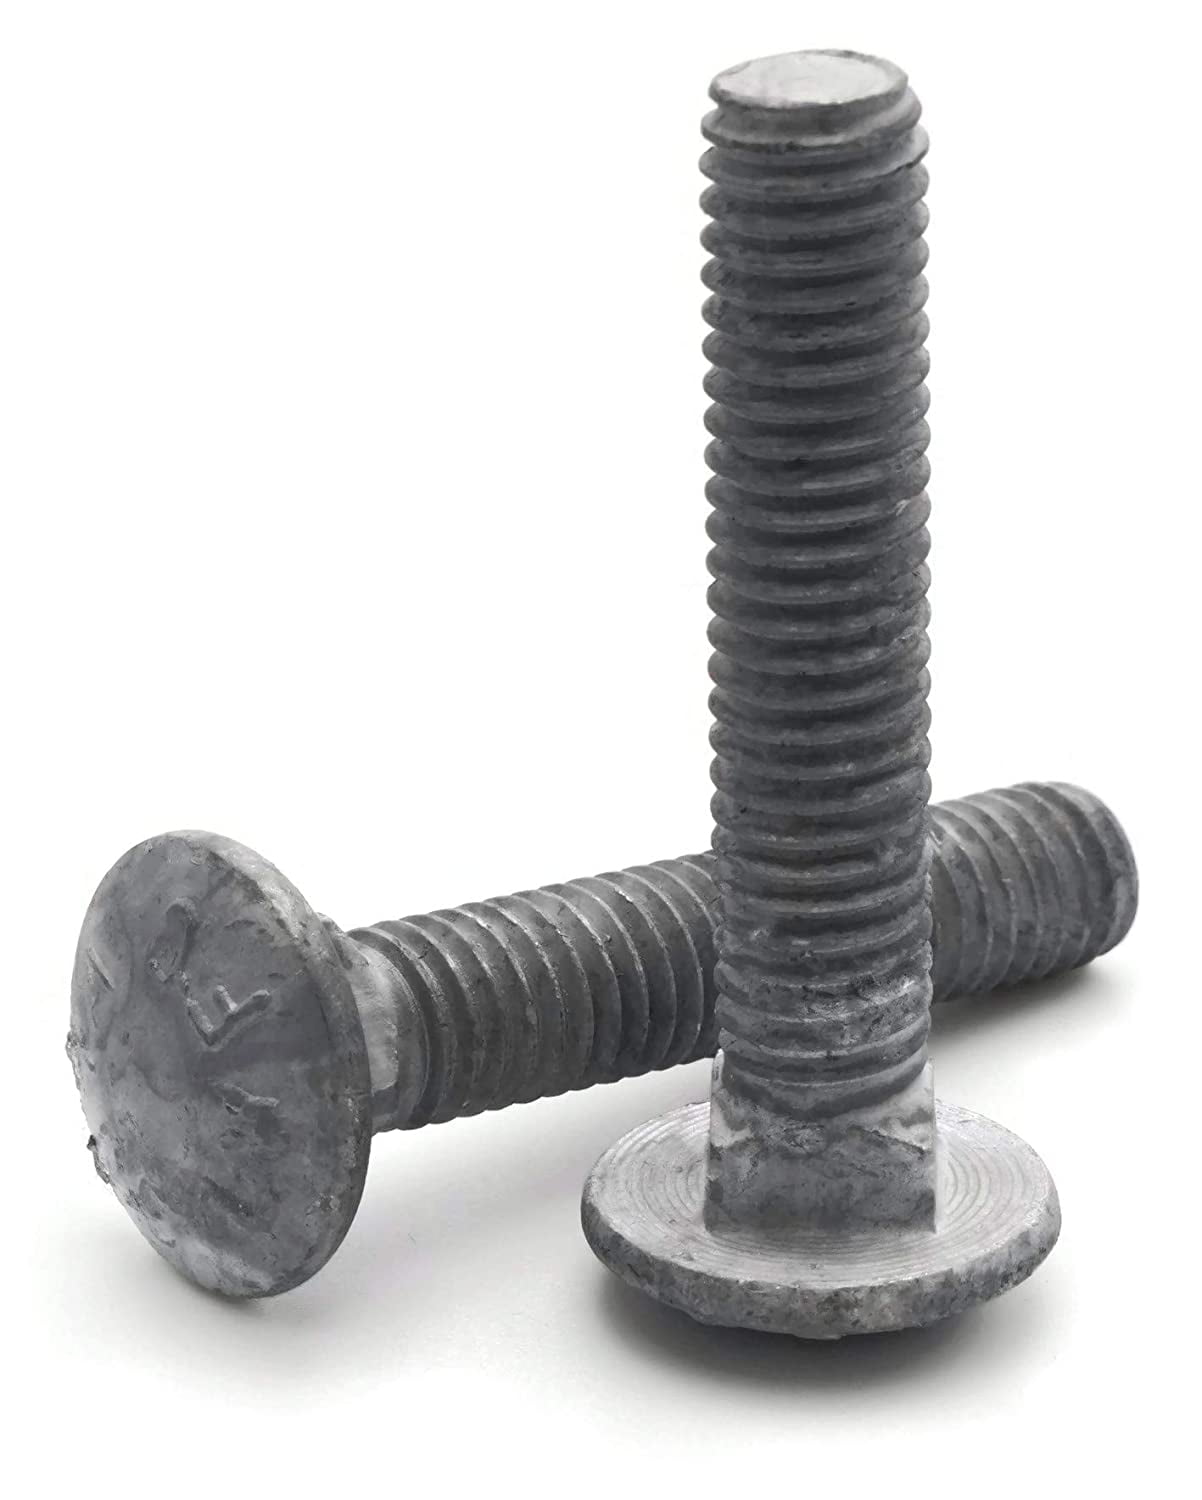 3/8-16 x 2-1/4" Carriage Bolts and Nuts Hot Dip Galvanized Quantity 25 